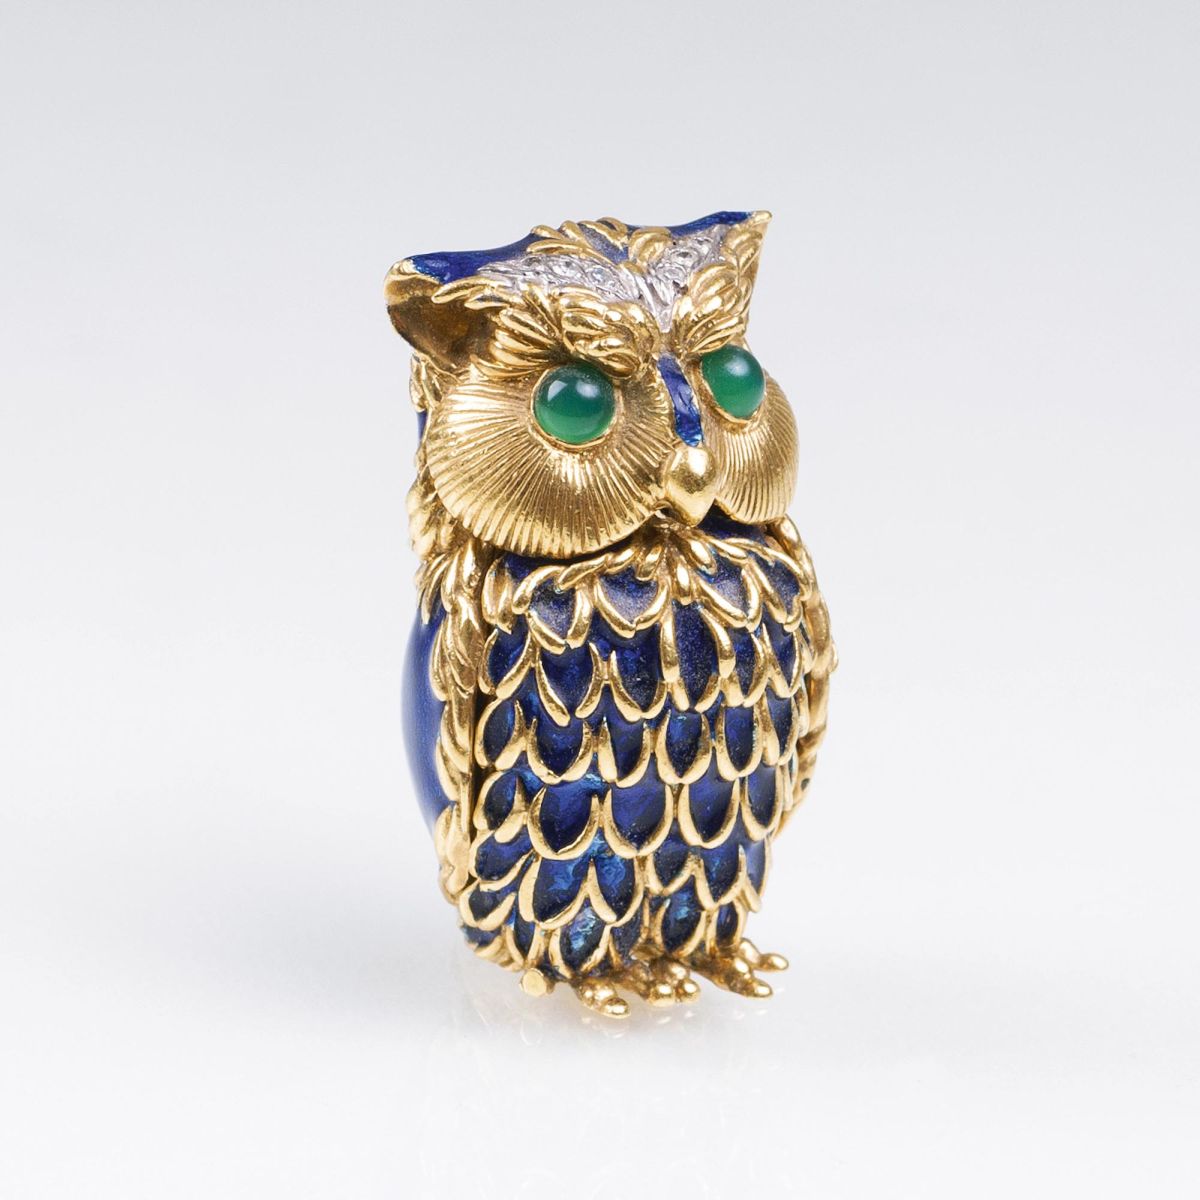 A Miniature Gold Box 'Owl' with Gemstones and blue Enamel